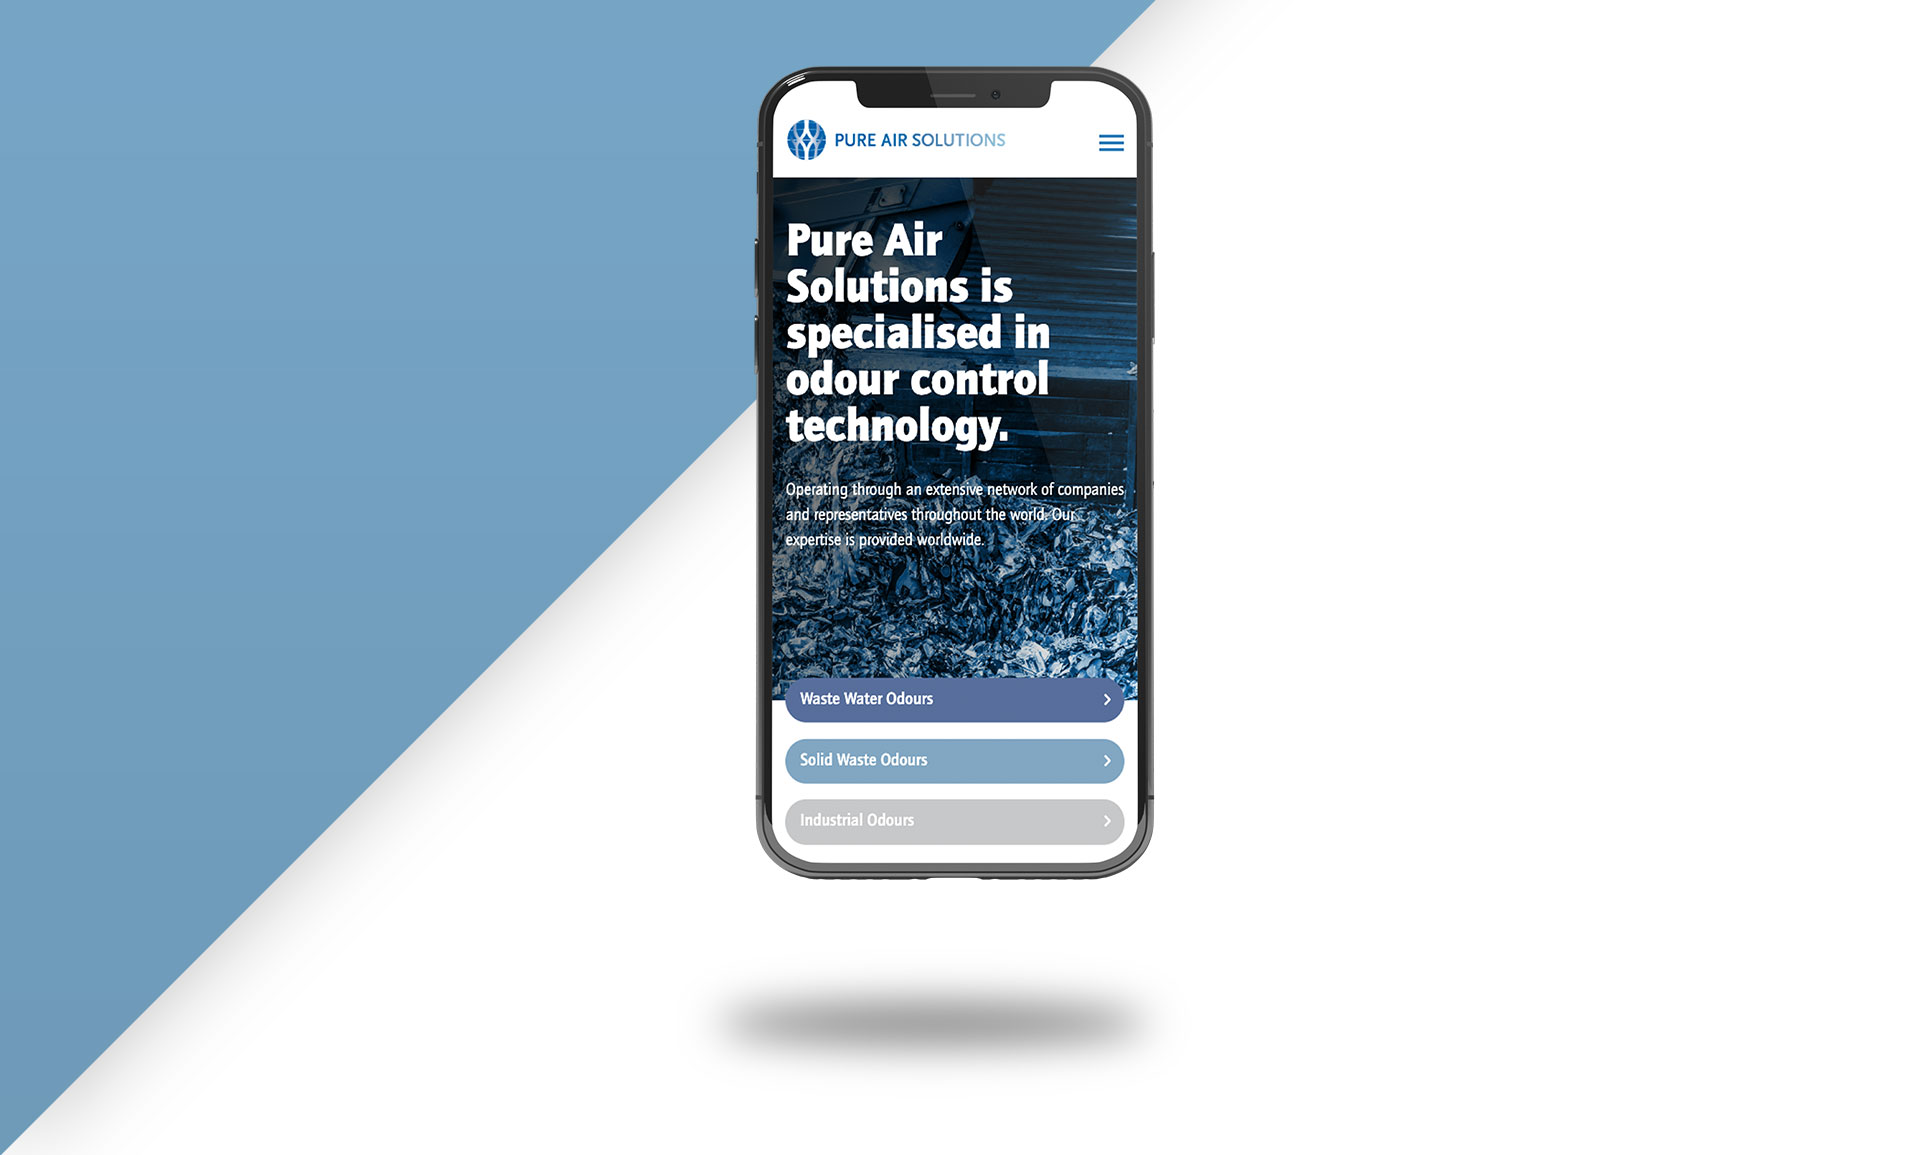 Pure Air Solutions